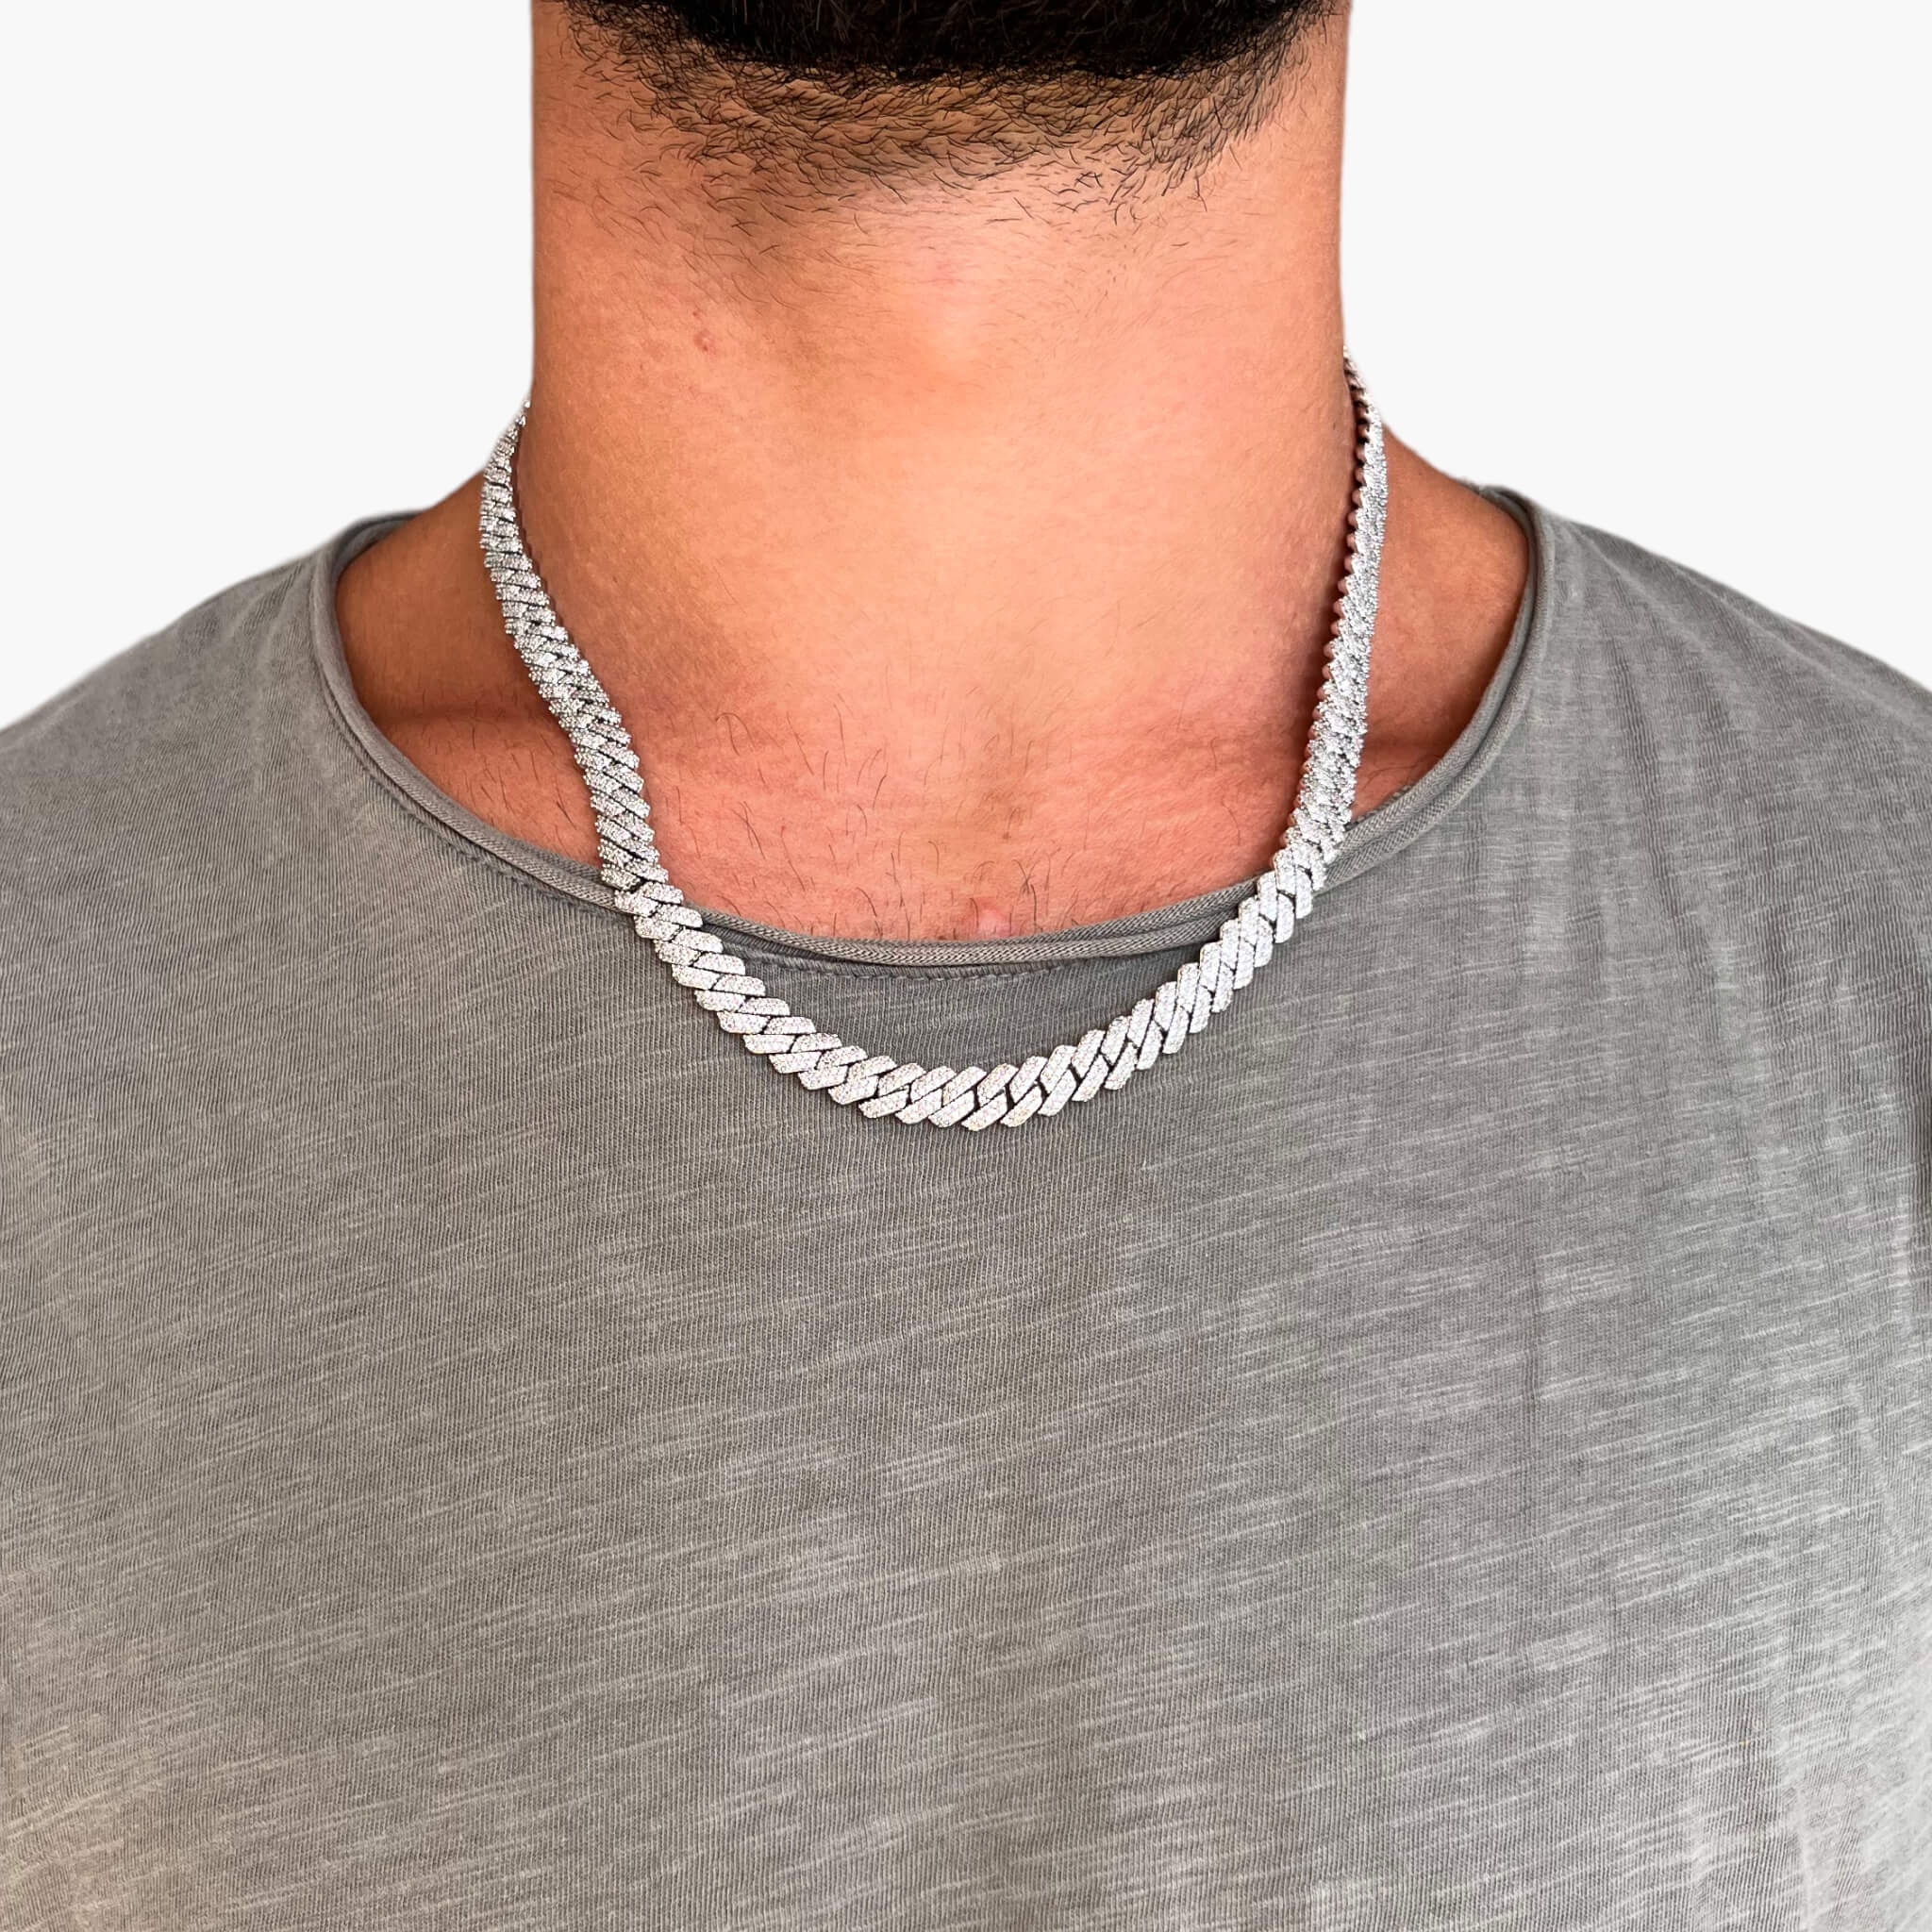 8mm Prong Cuban Link Chain - White Gold